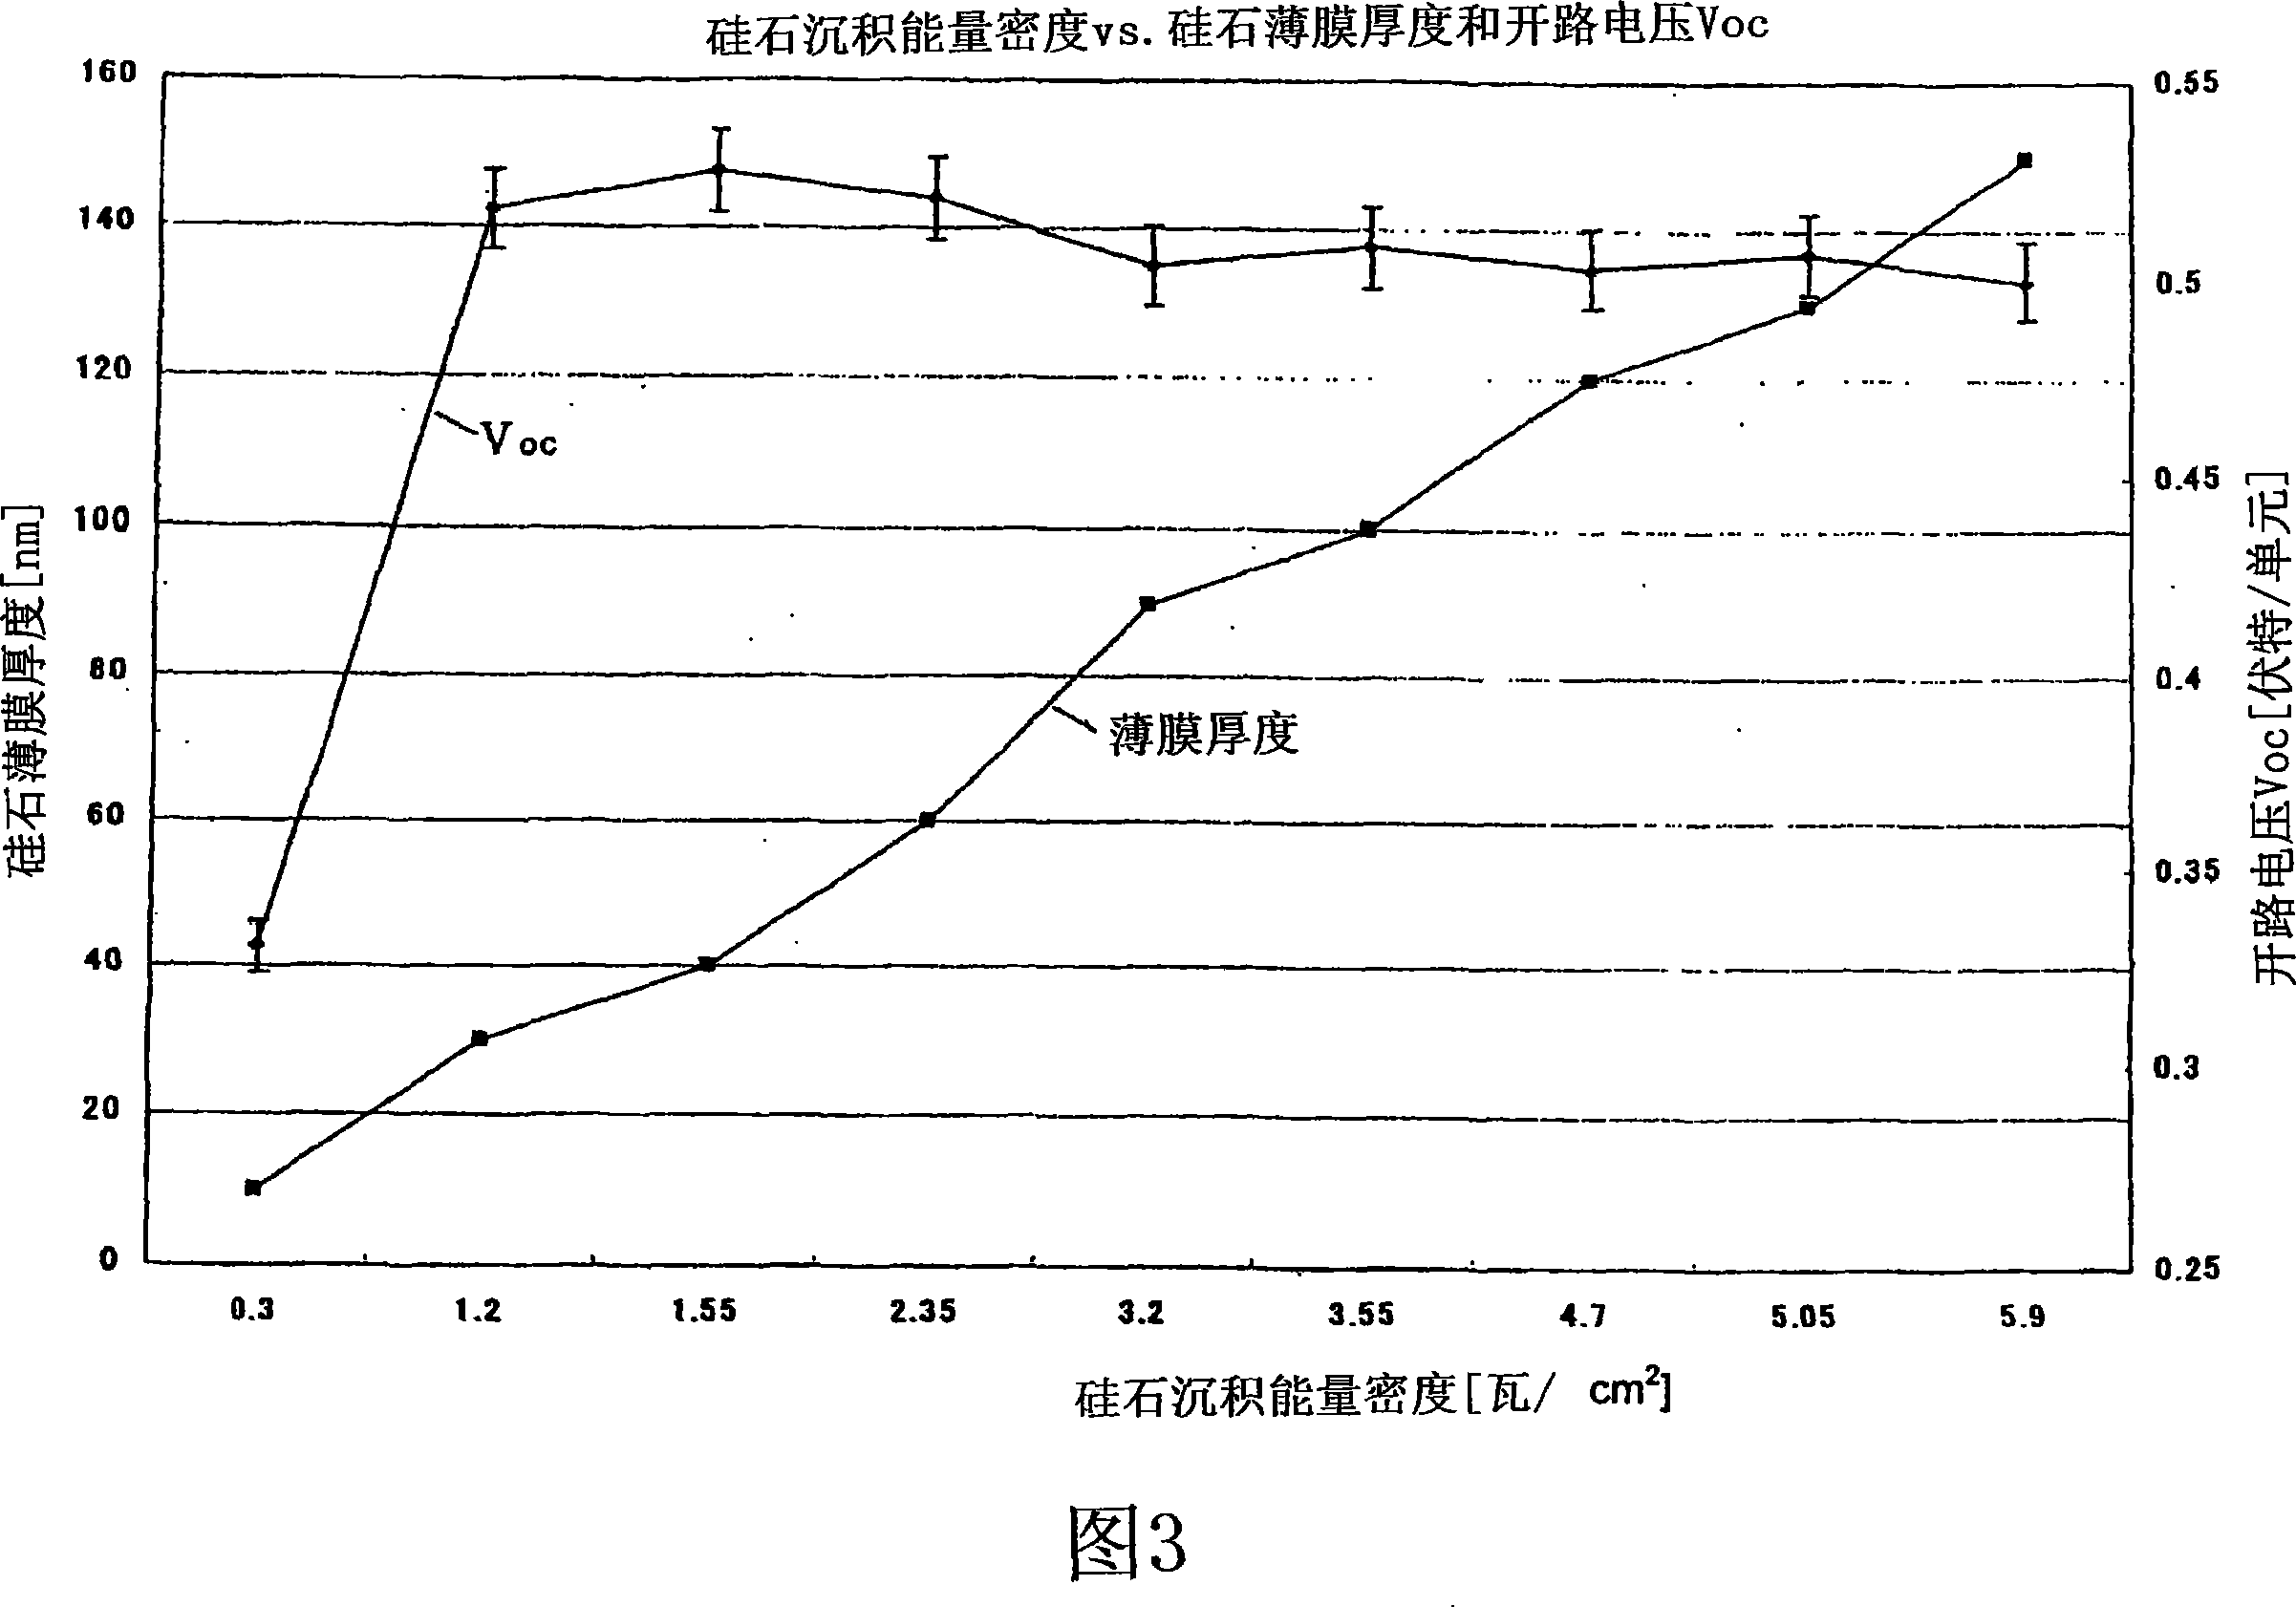 Cis-based thin film solar battery and process for producing the same